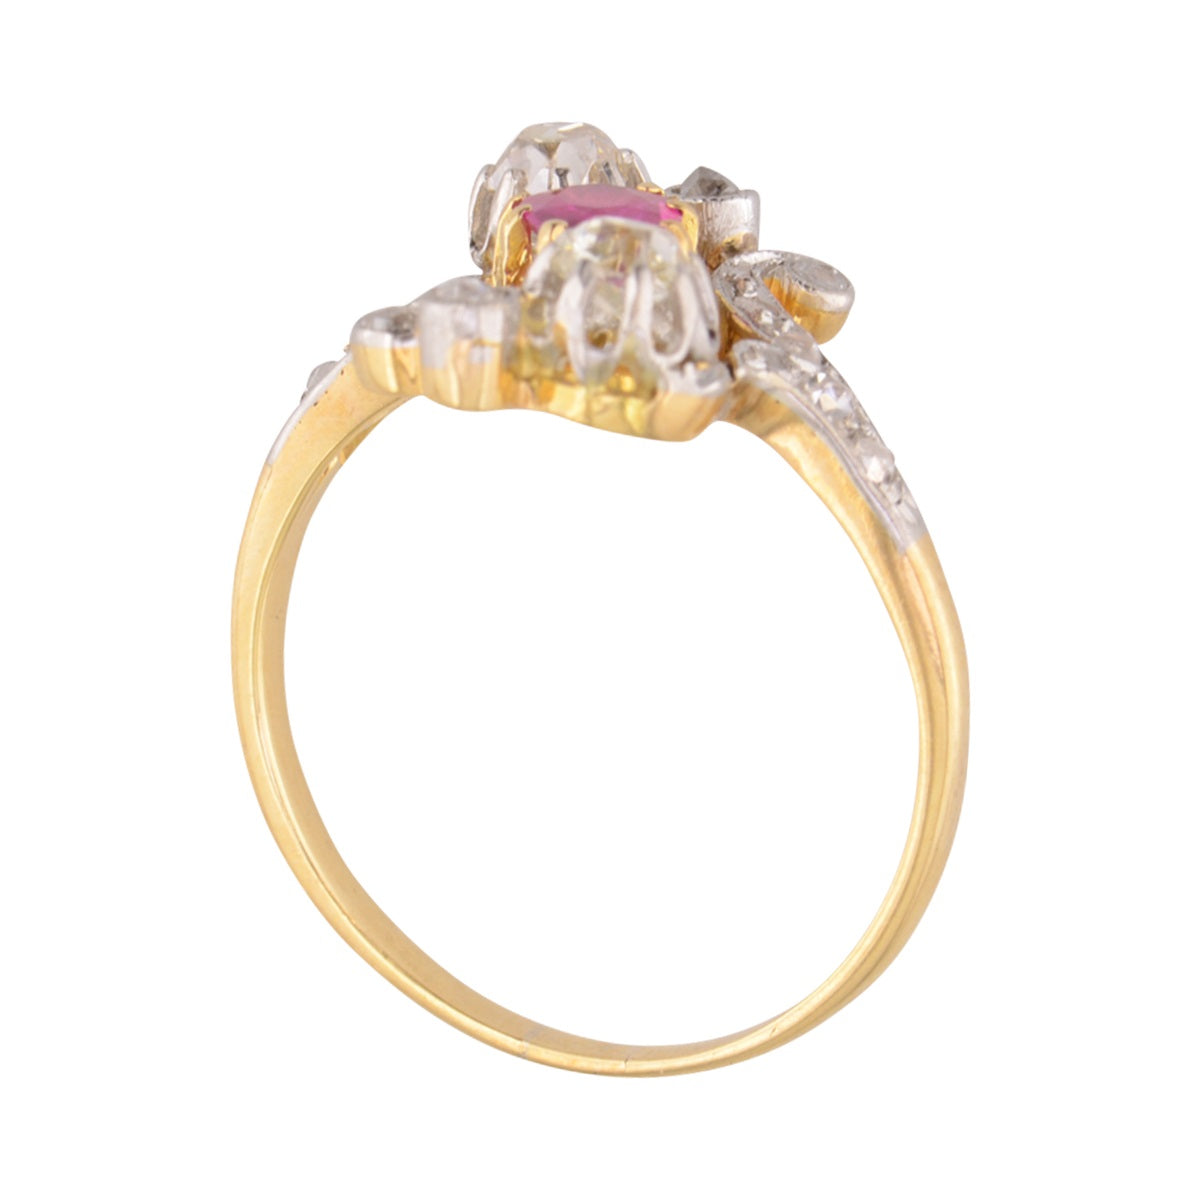 Authentic Edwardian Pink Sapphire and Diamond ring 'Ada.'